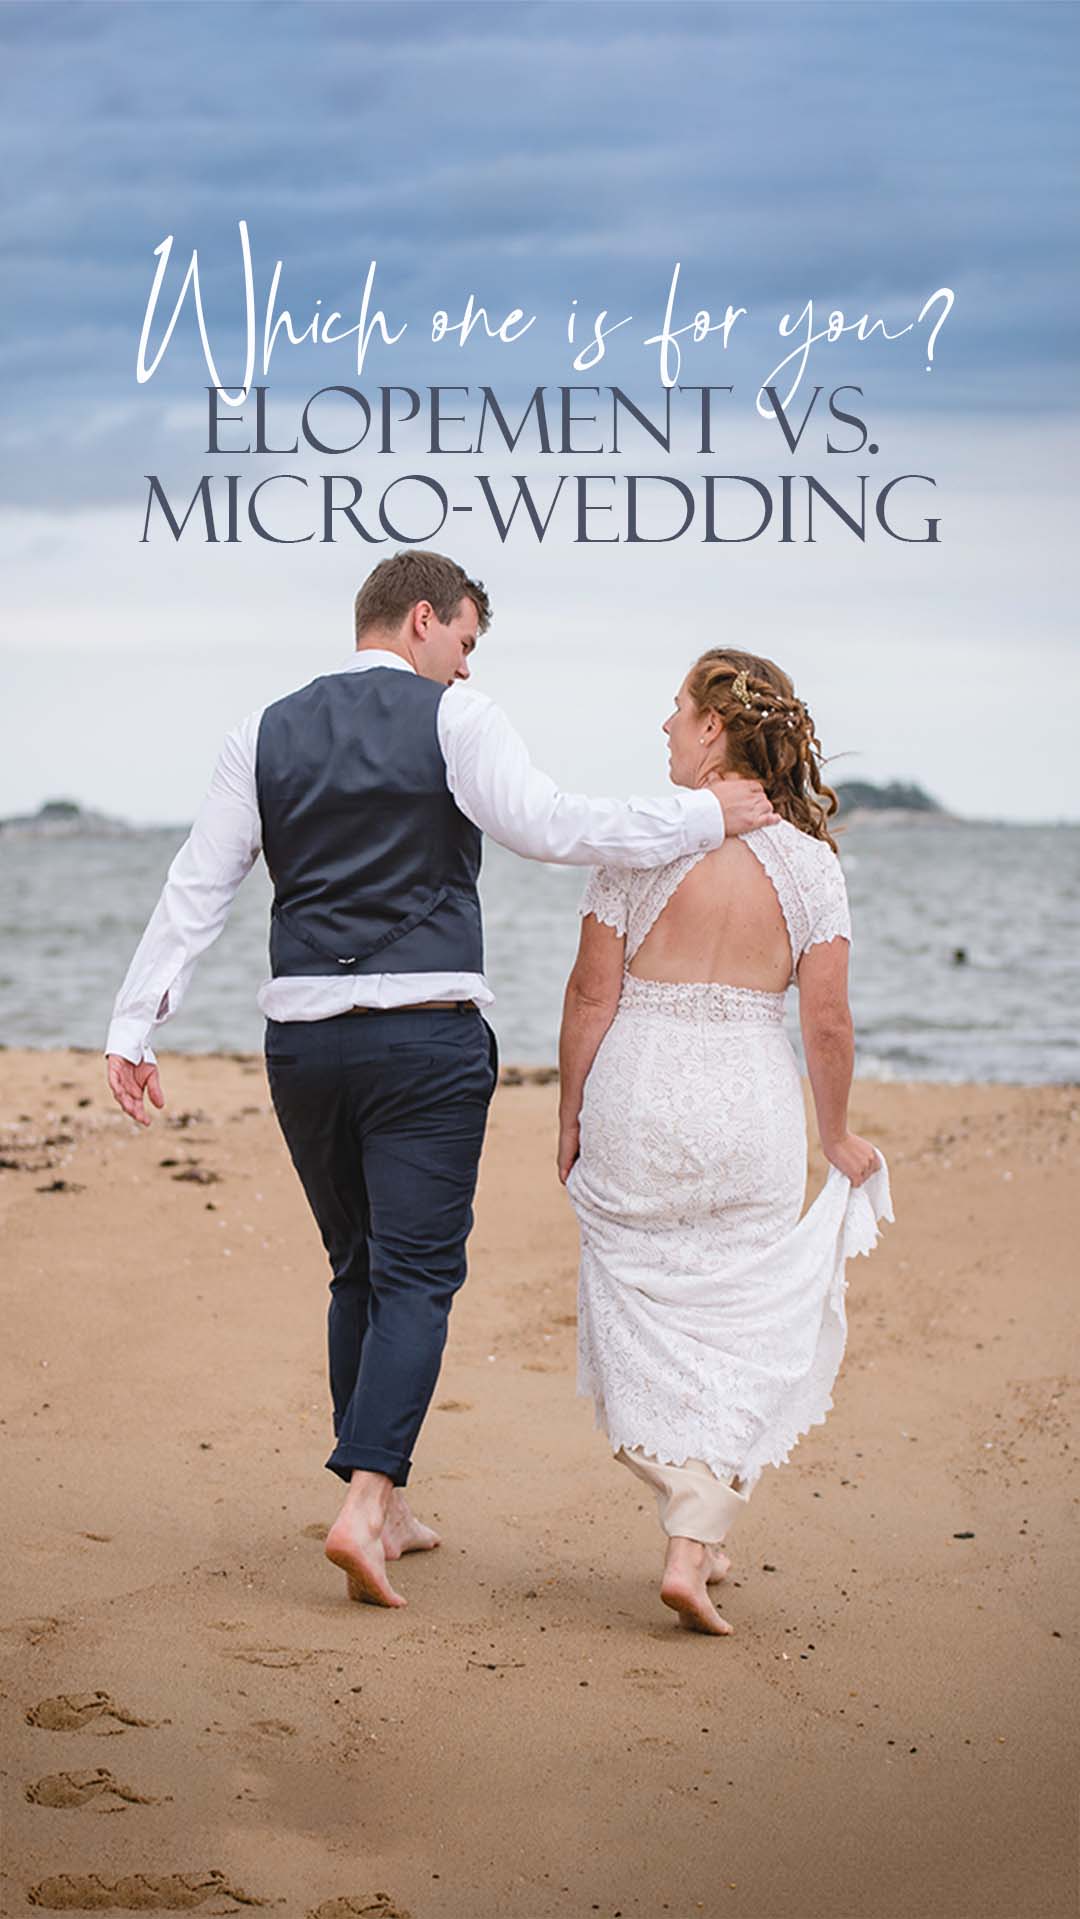 elope vs micro 1 9x16 1 Planning a micro wedding or elopement can be truly magical! But when it comes to deciding on an elopement vs micro wedding, it's easy to get bogged down in the details and trying to decide what your wedding day is and should be. Spoiler: it's whatever reflects you. Read on to learn about what really separates an elopement from a micro-wedding and how they're actually very similar.